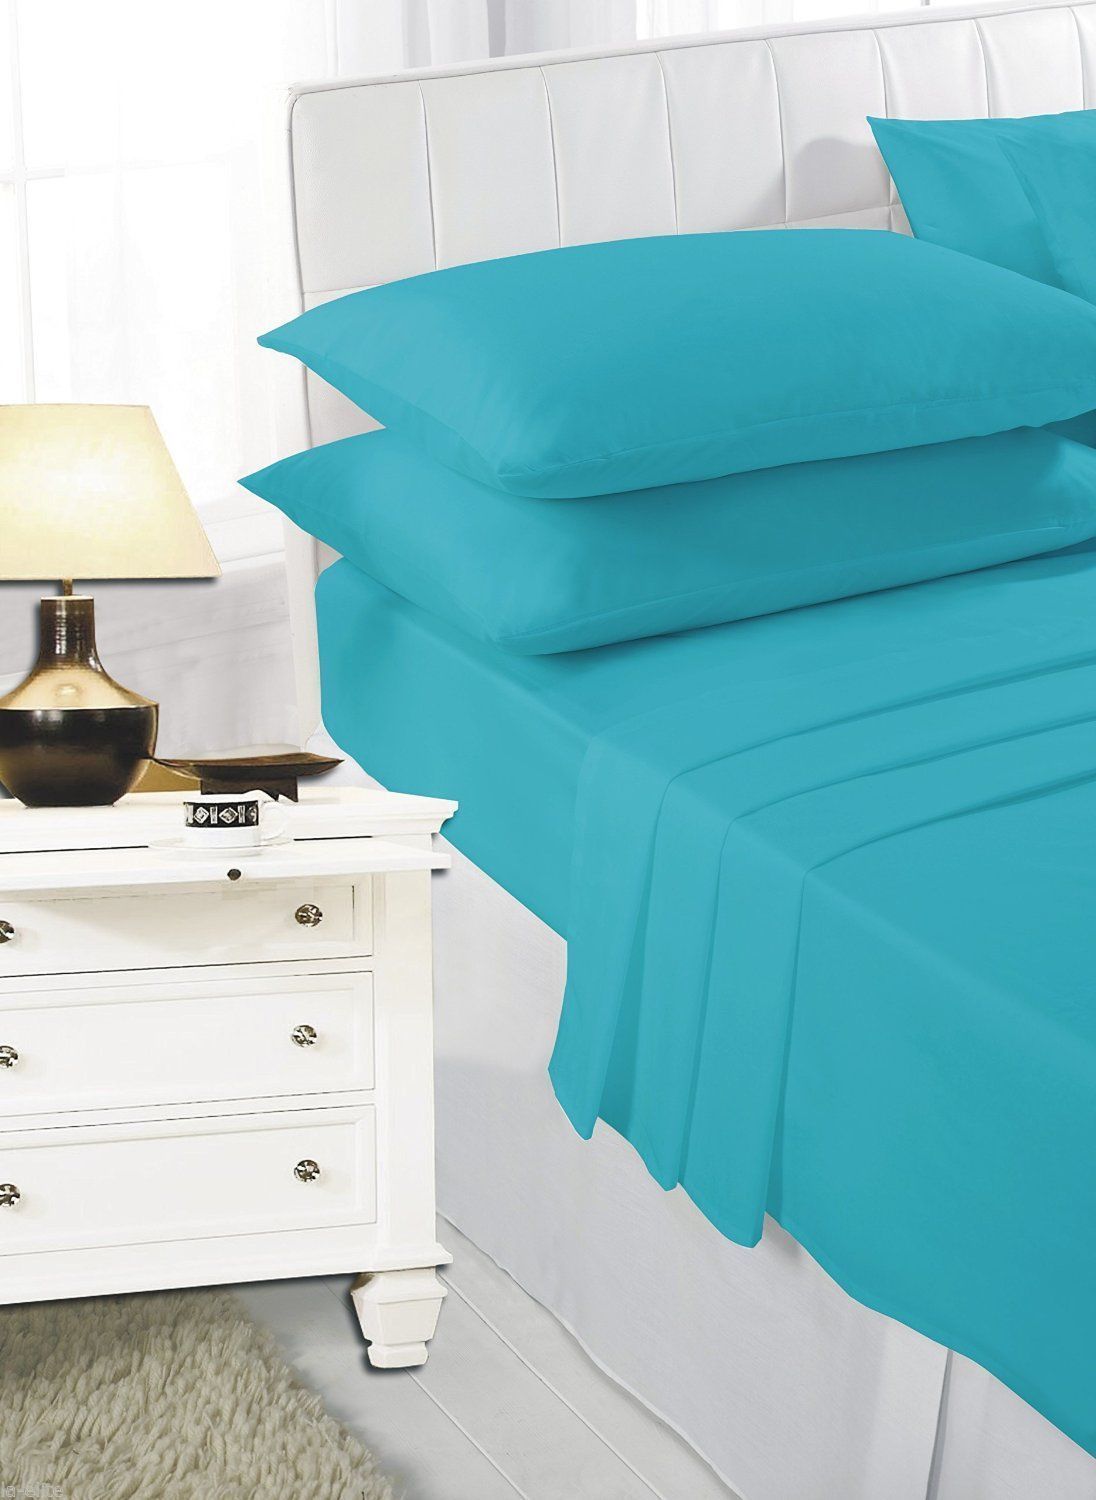 Sitara Trading Ltd T168 Flat Sheet Easy Care Polycotton Plain Dyed Bedding Uk Bed Size Sky Blue 2 PIECES OF PILLOWCASE 